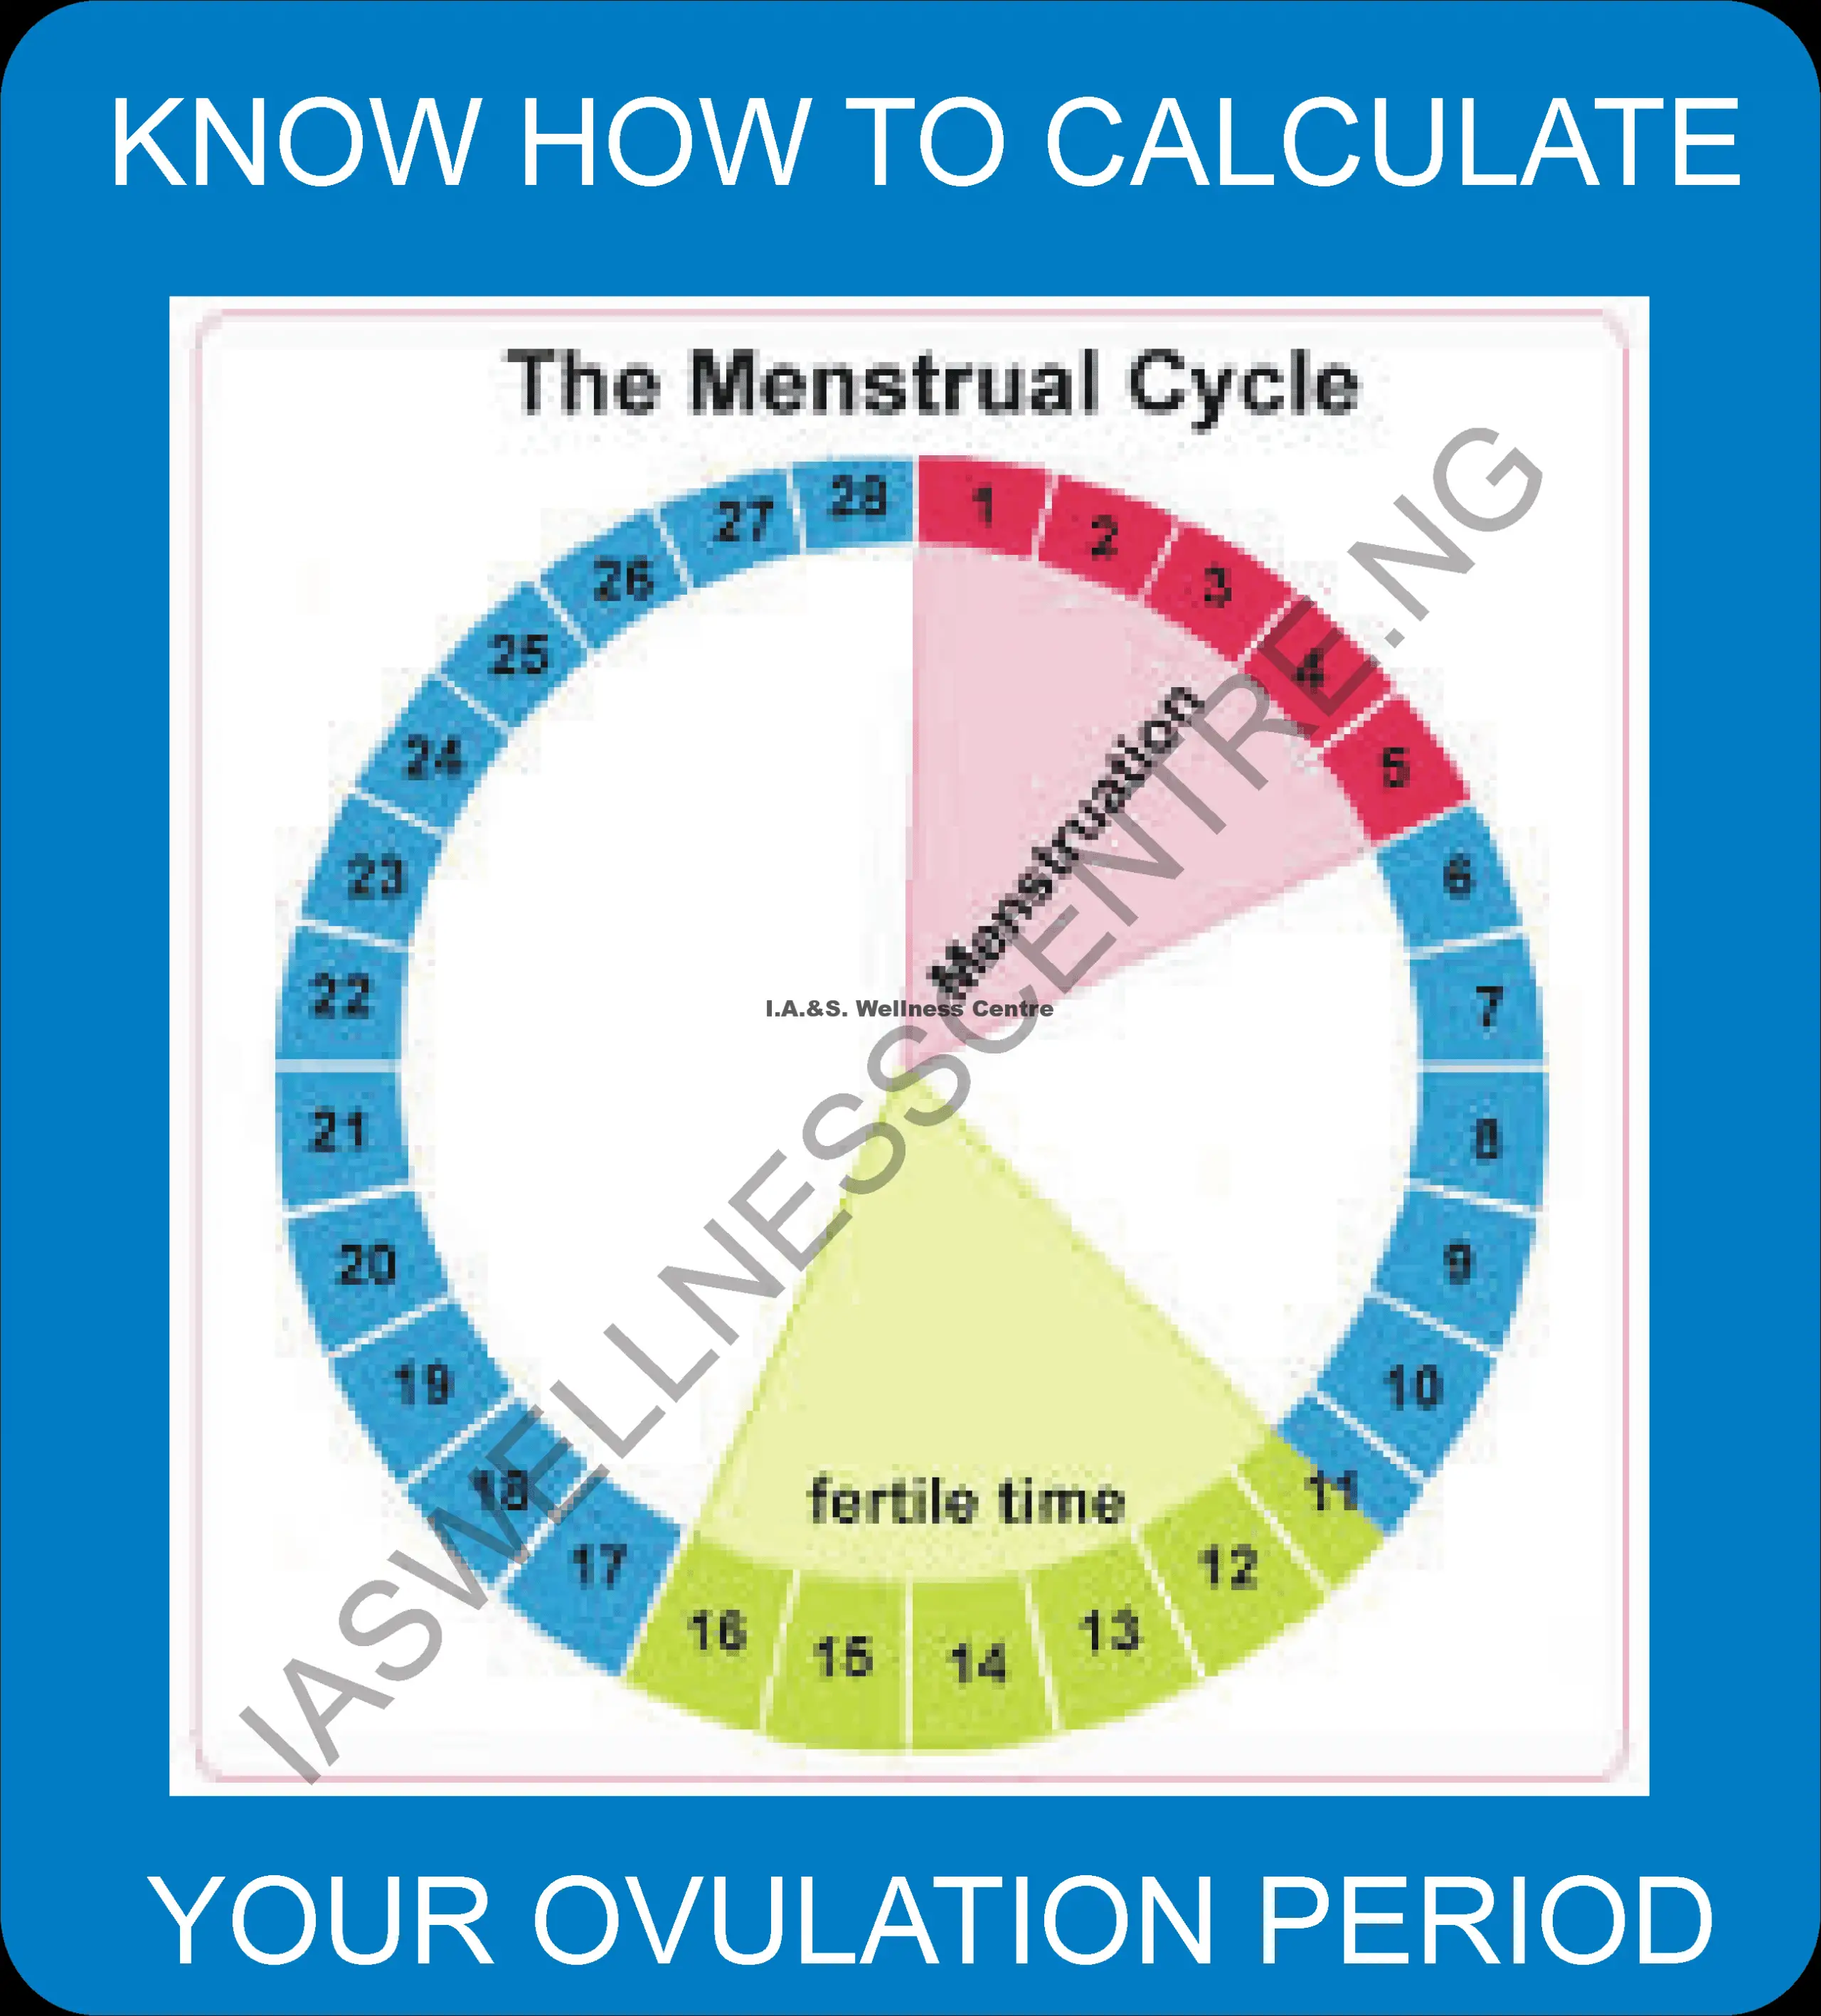 HOW TO CALCULATE YOUR OVULATION PERIOD